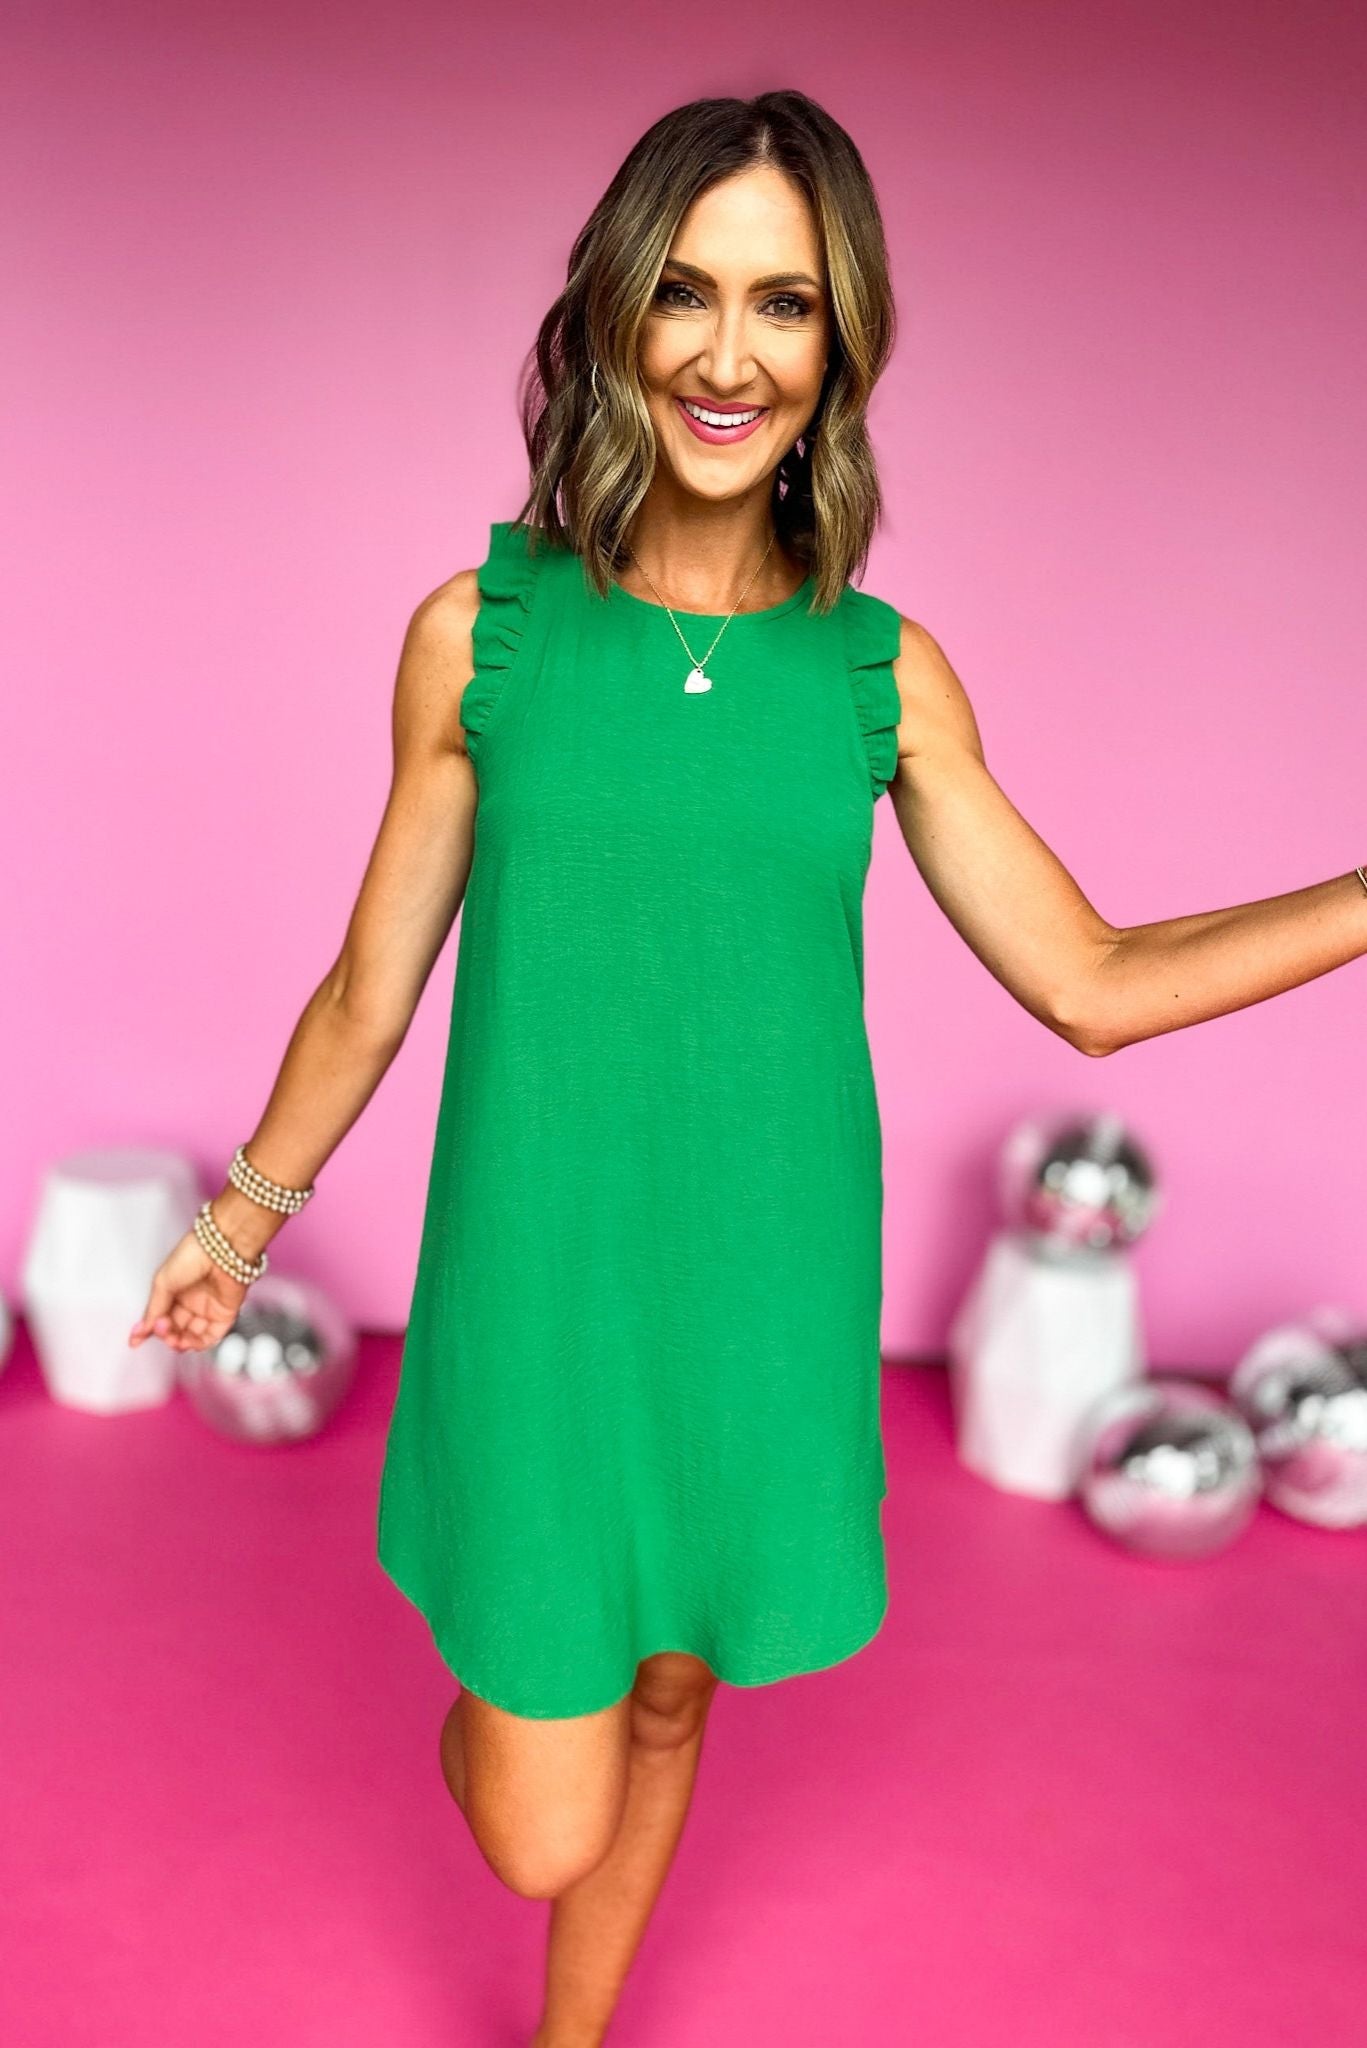 SSYS The Emma Dress In Kelly Green, green dress, ruffle detail, summer dress, mom style, shop style your senses by mallory fitzsimmons